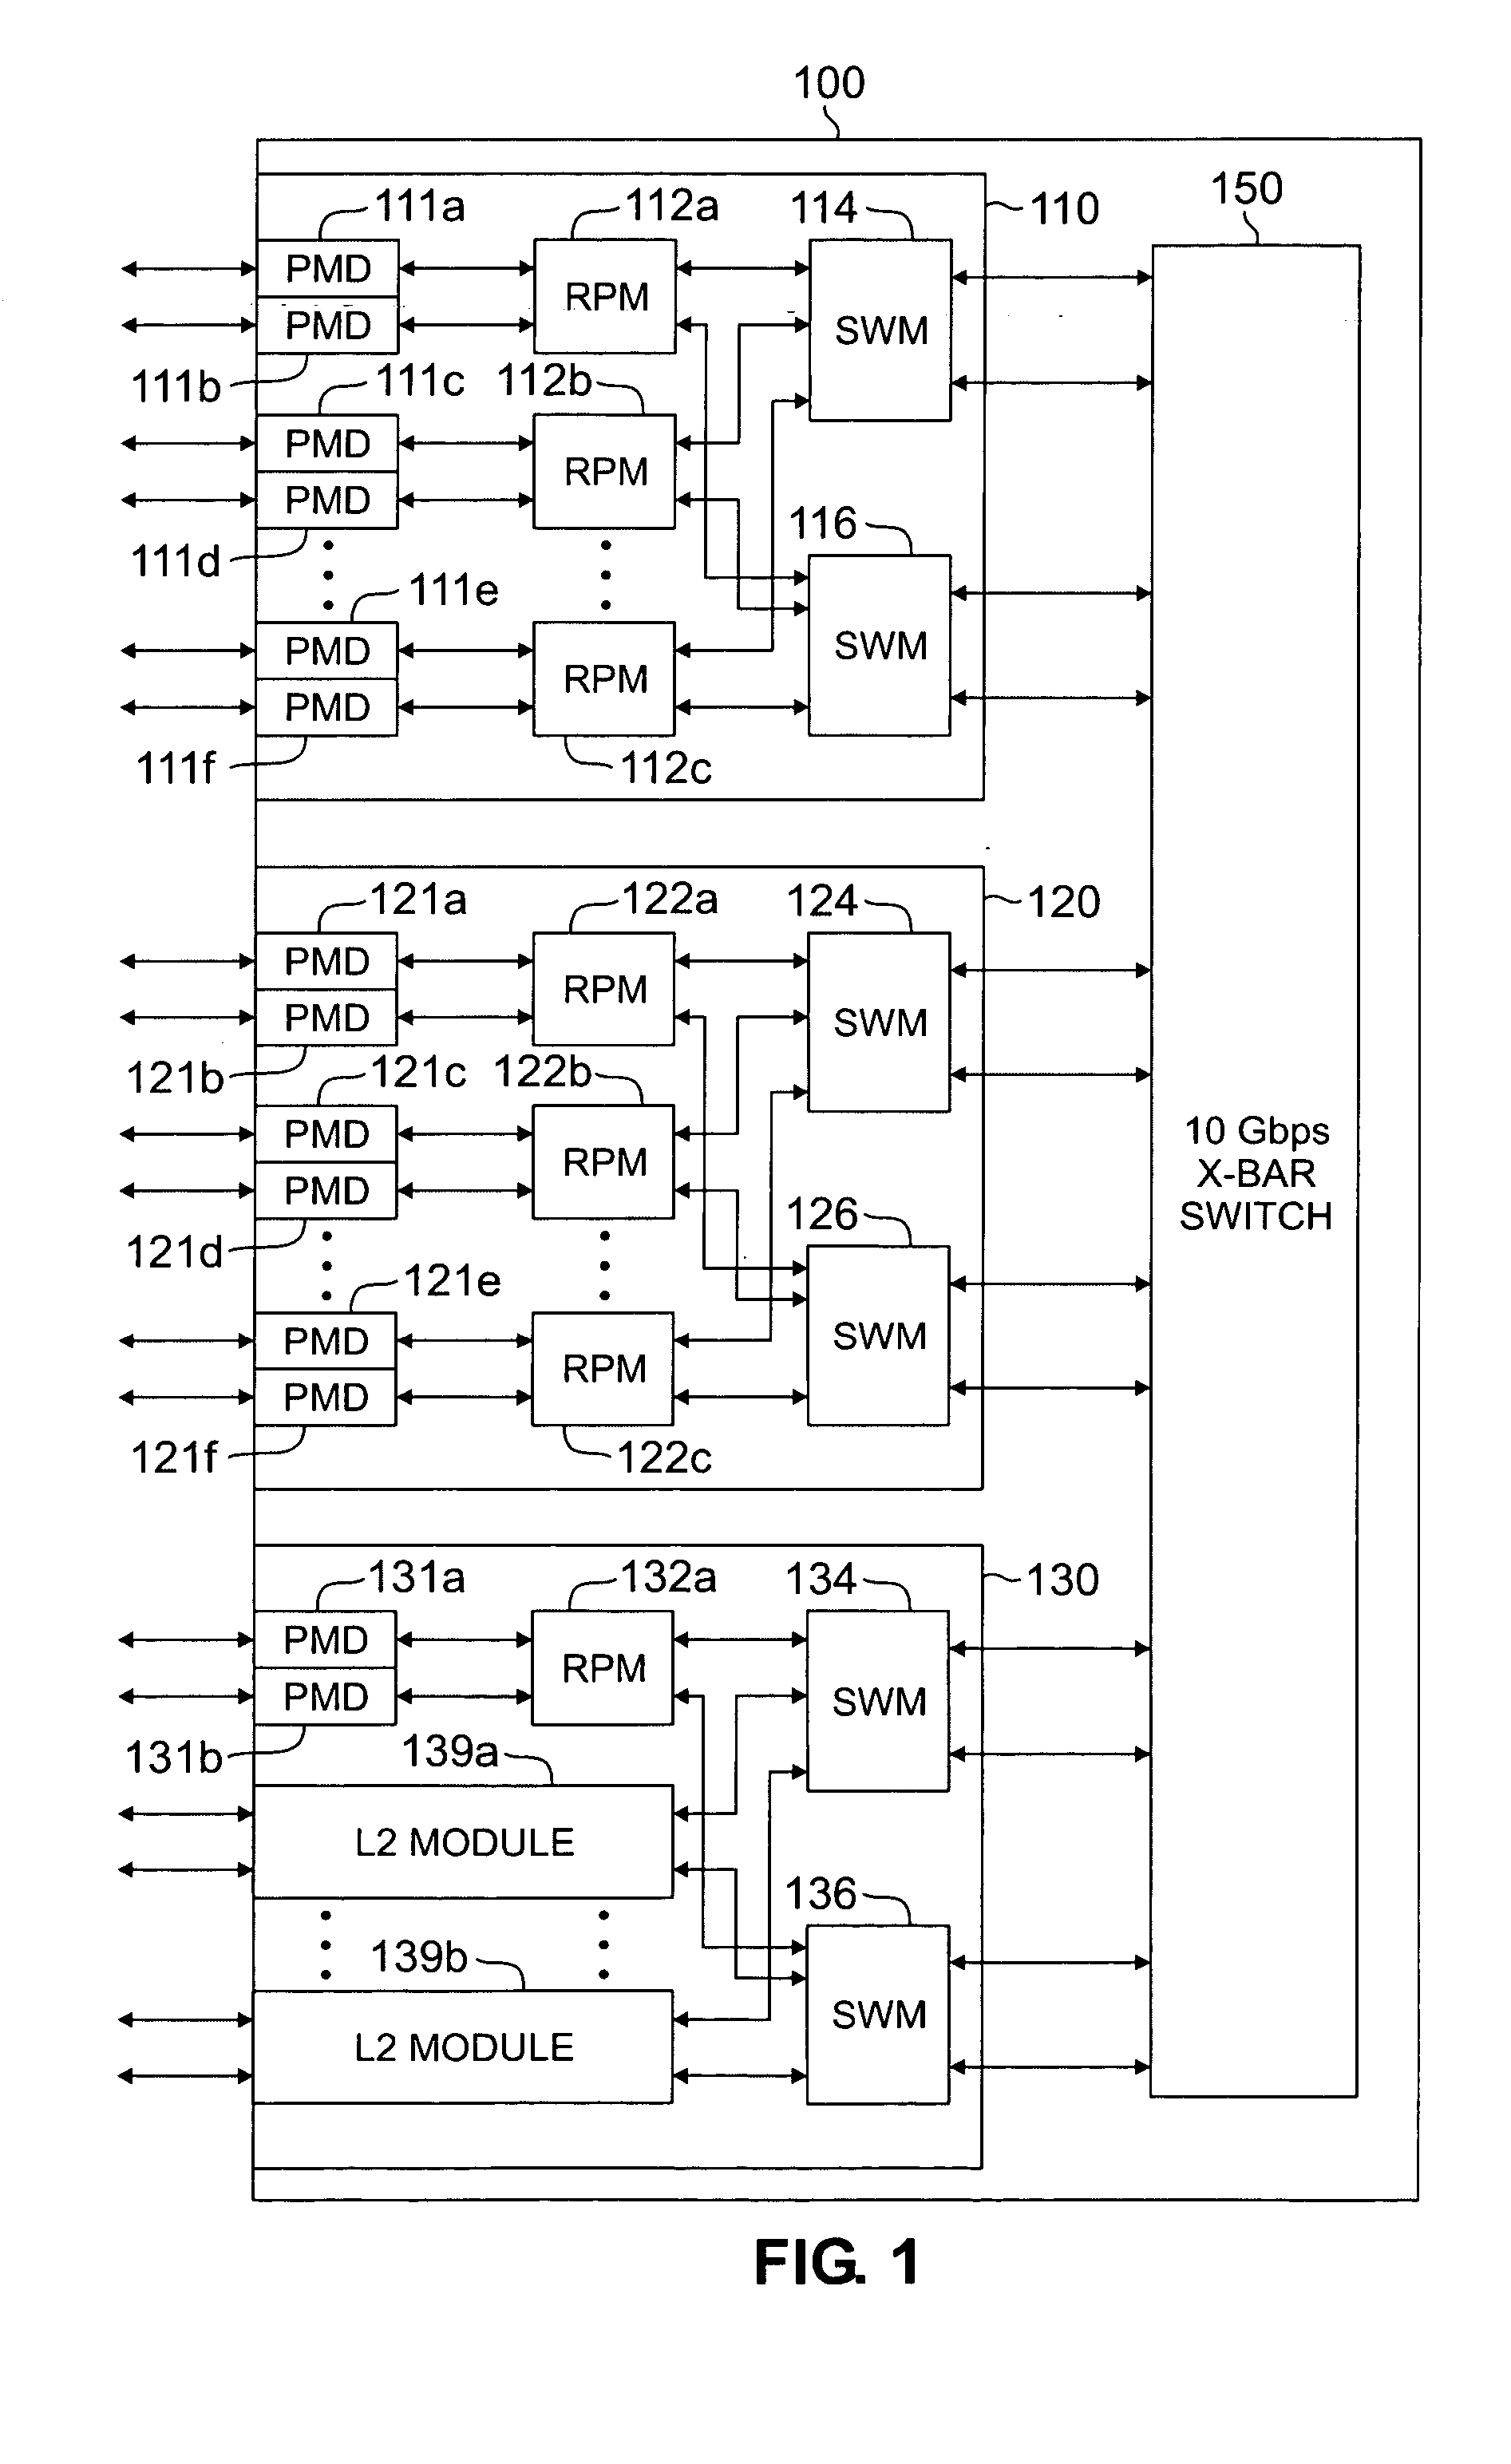 Apparatus and method for distributing forwarding table lookup operations among a plurality of microengines in a high-speed routing node